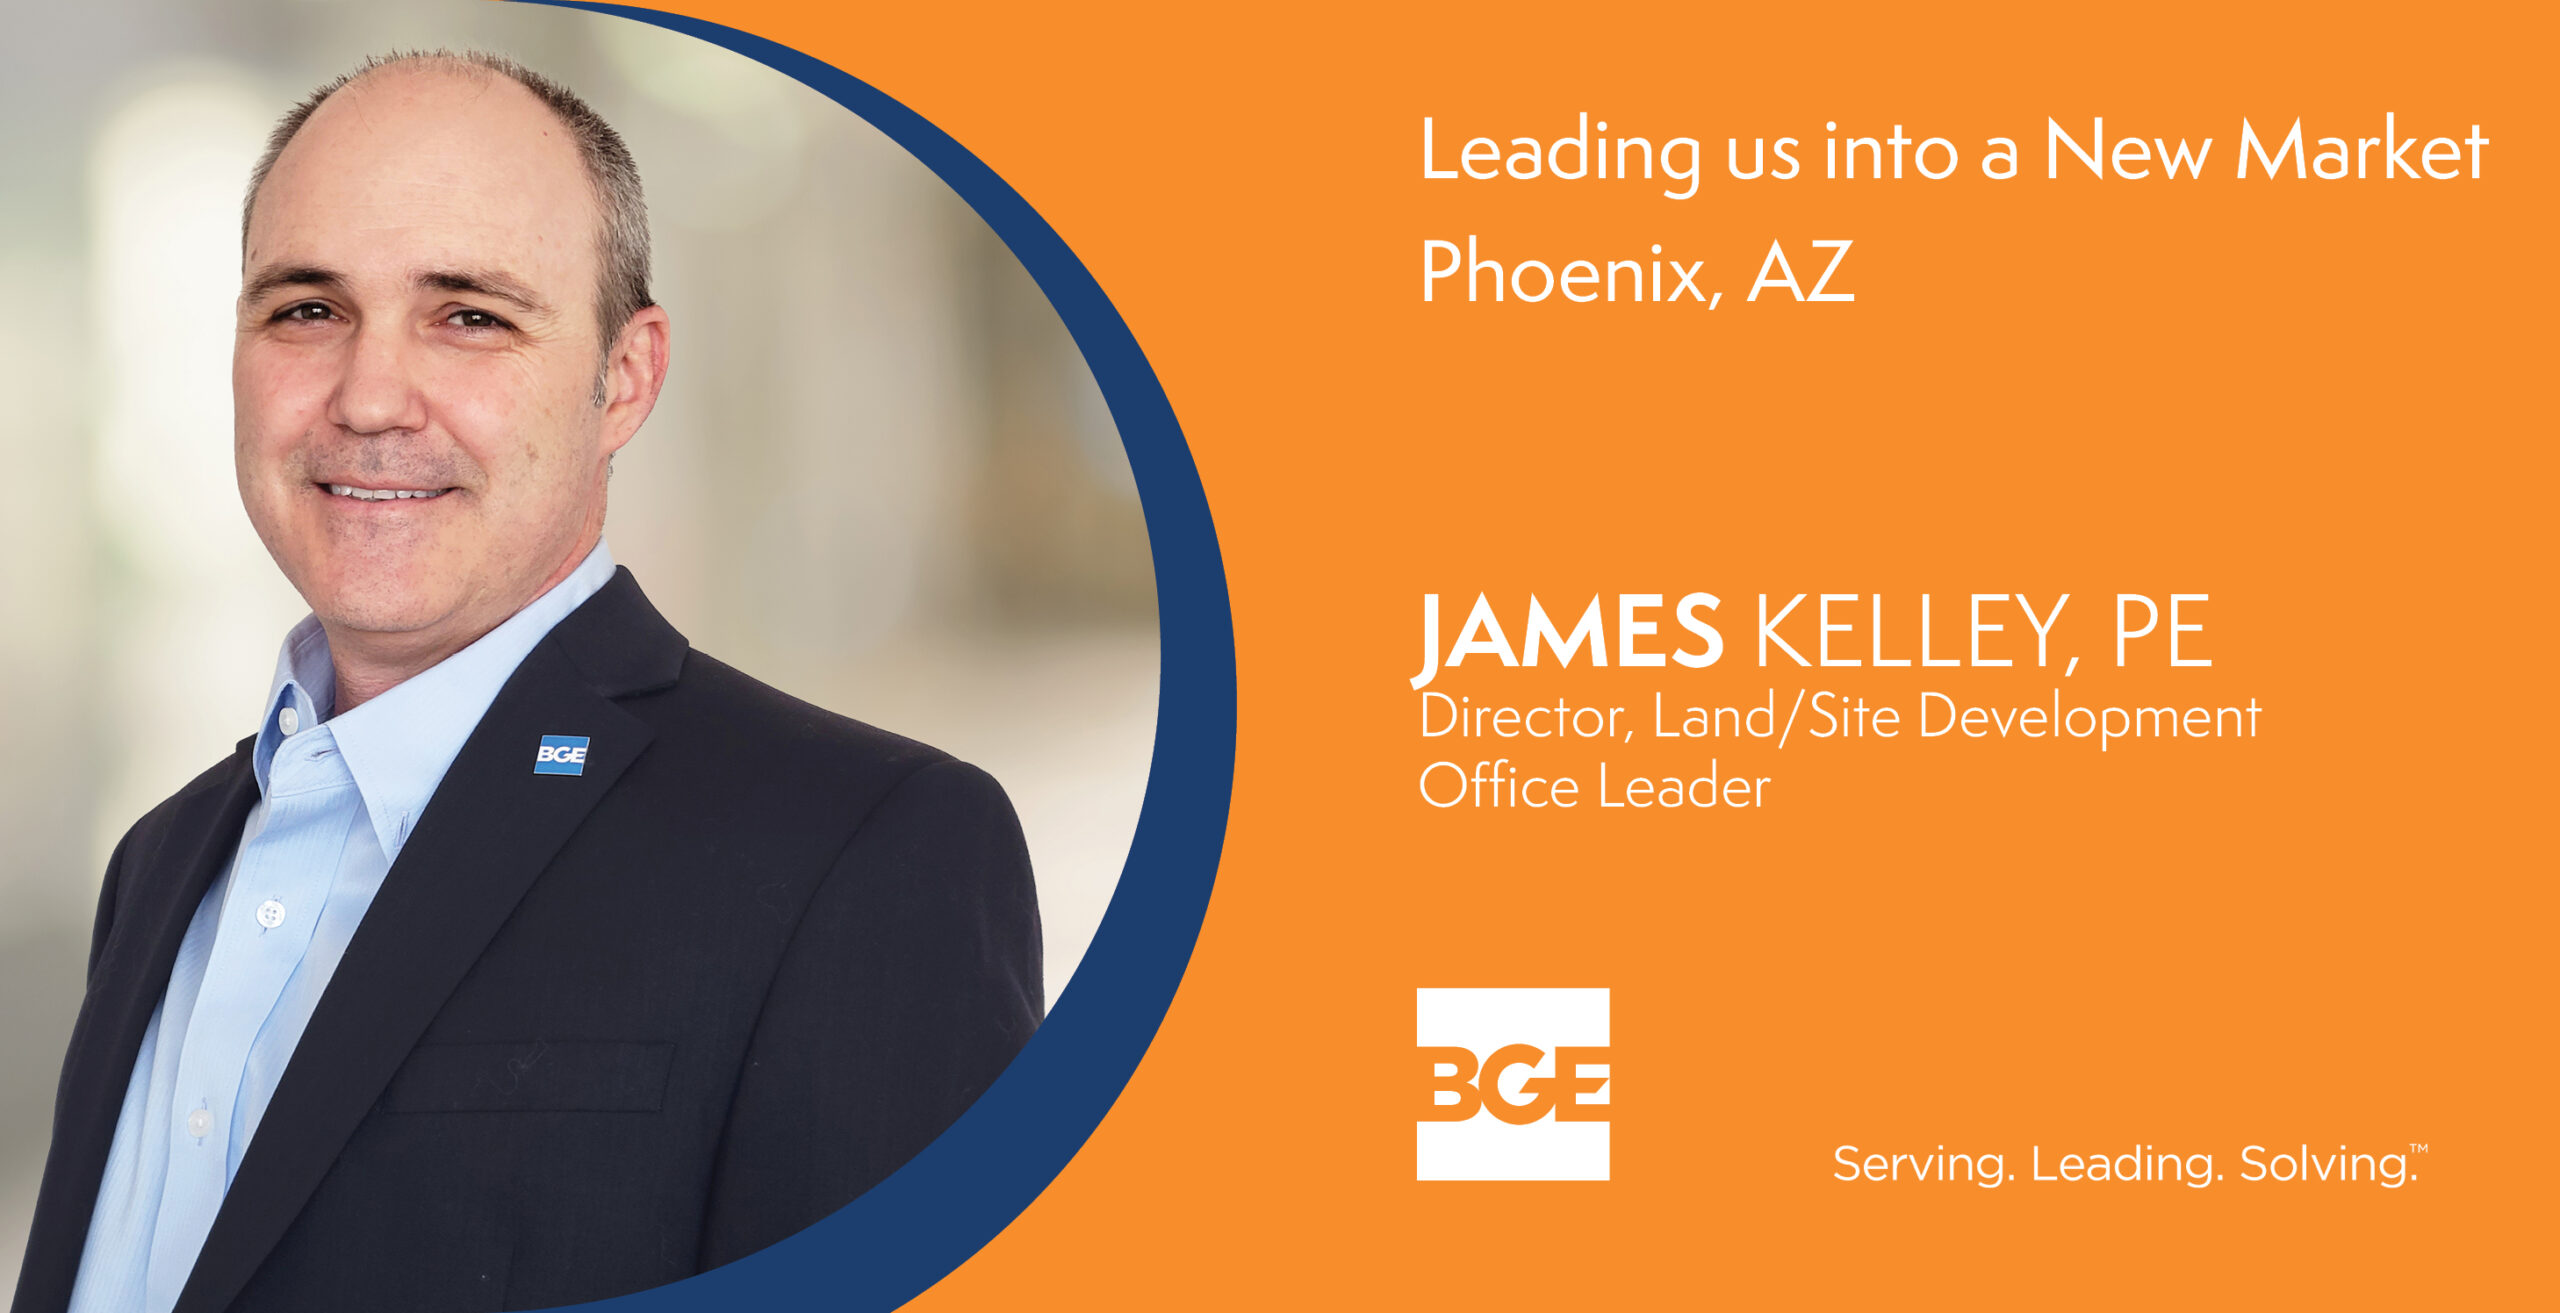 Promotion graphic announcing James Kelley as Director, Land/Site Development and New Office Leader in Phoenix, AZ